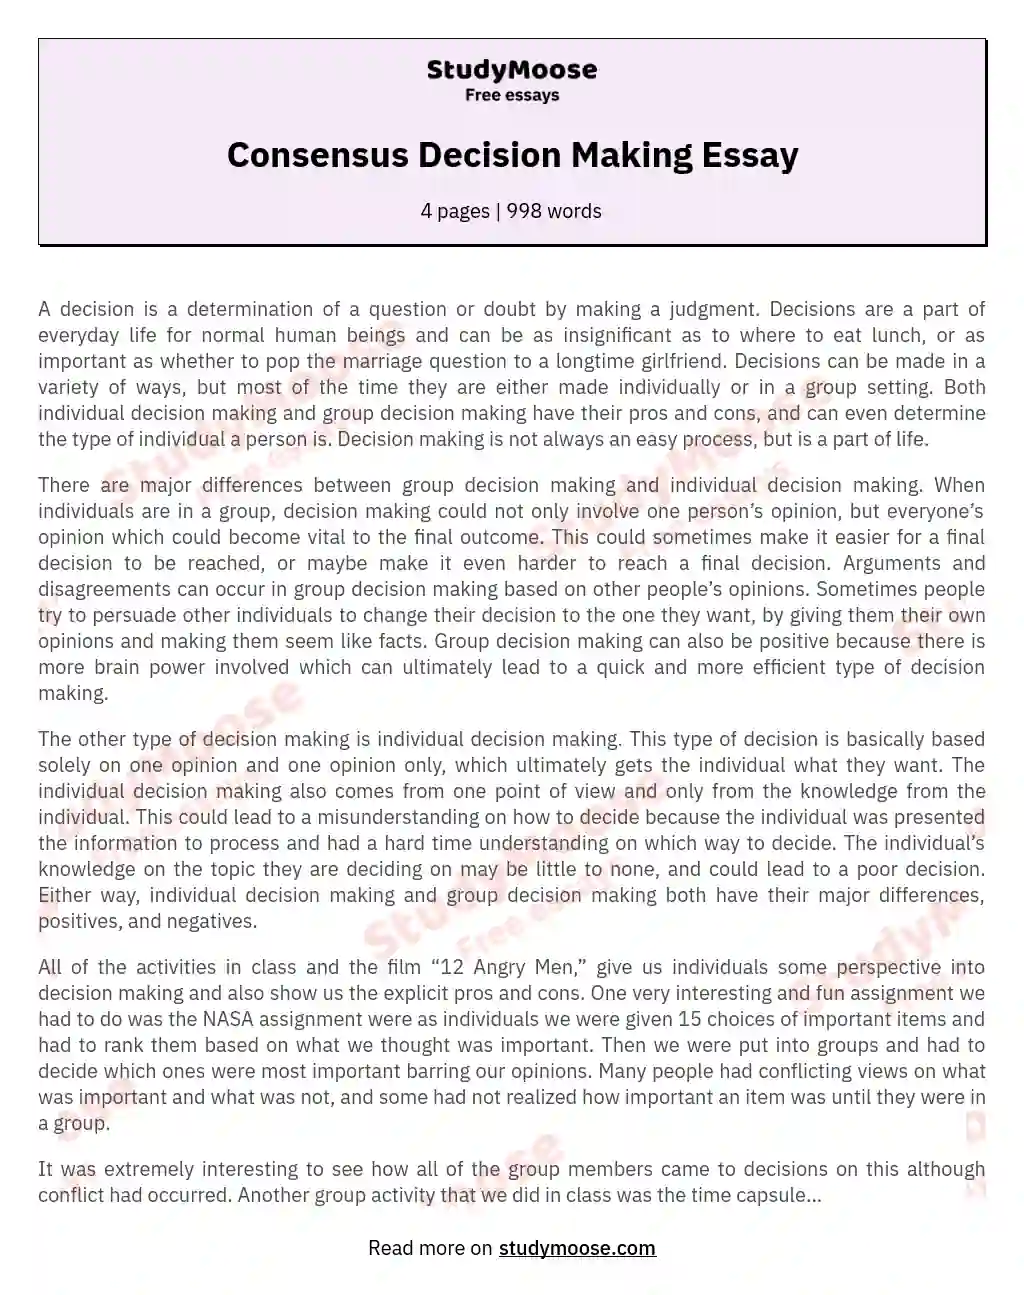 personal decision making essay